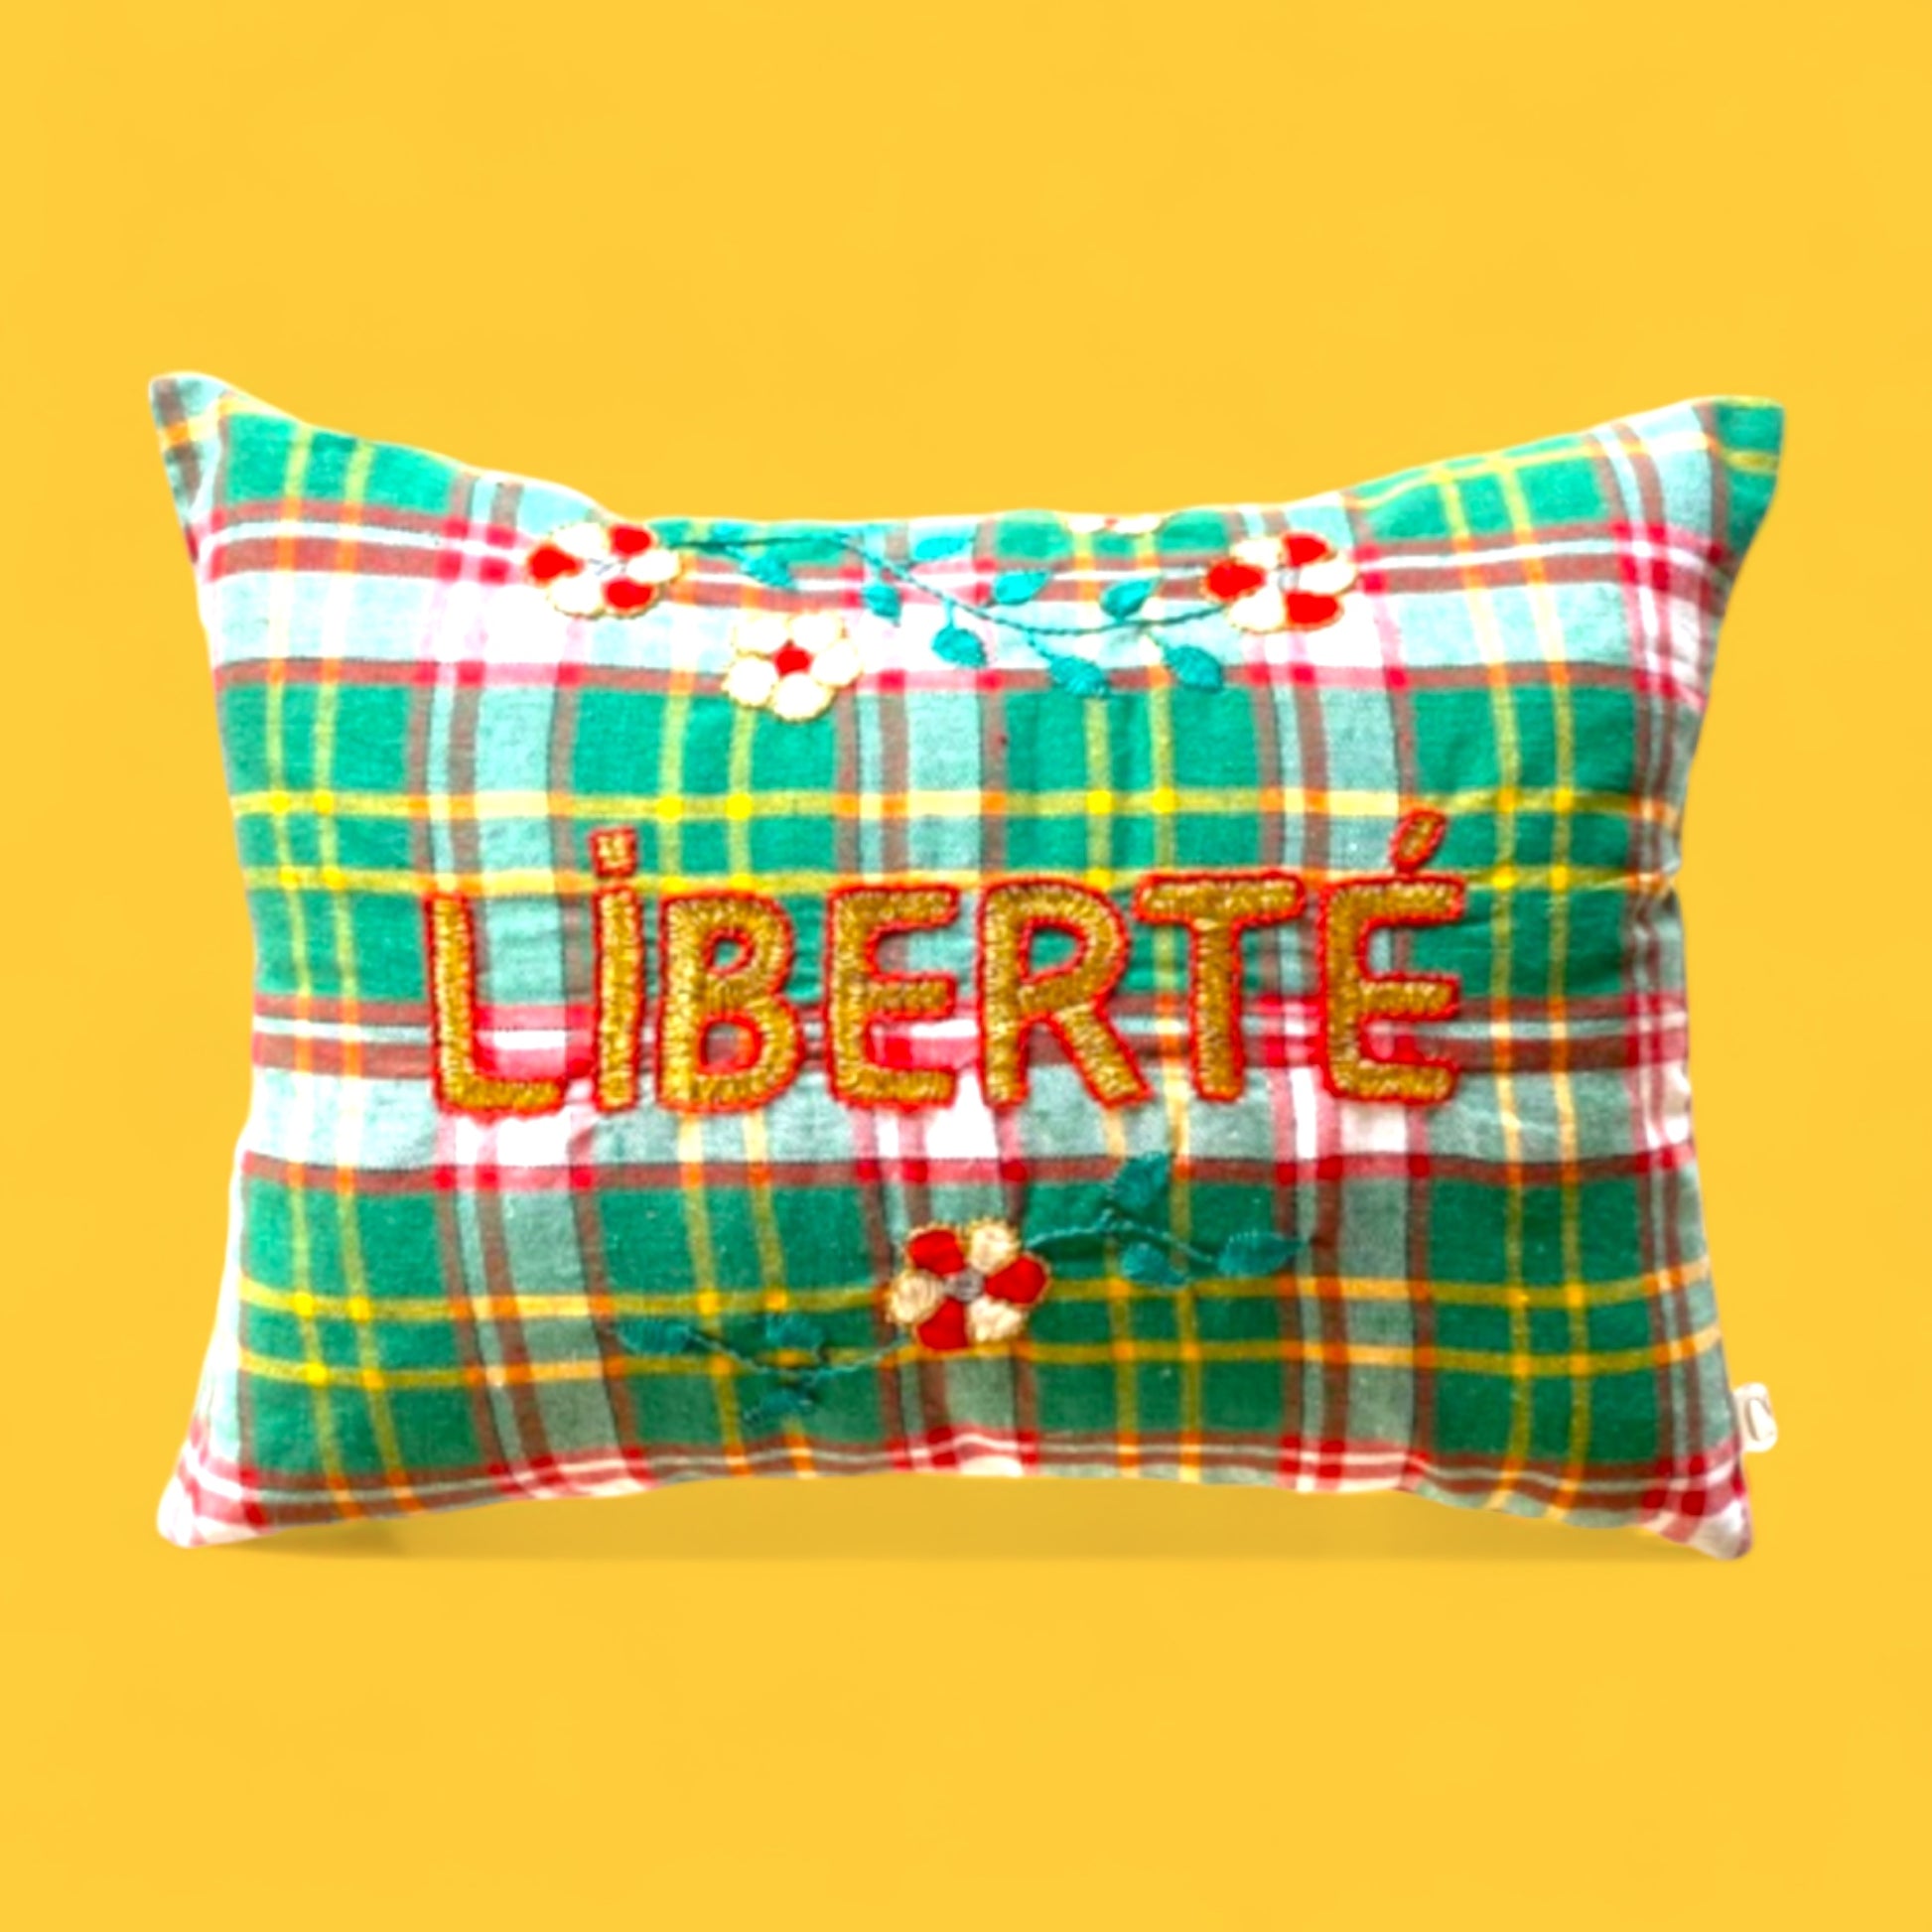 French Embroidered Pillow - Liberte - Hella Kitsch